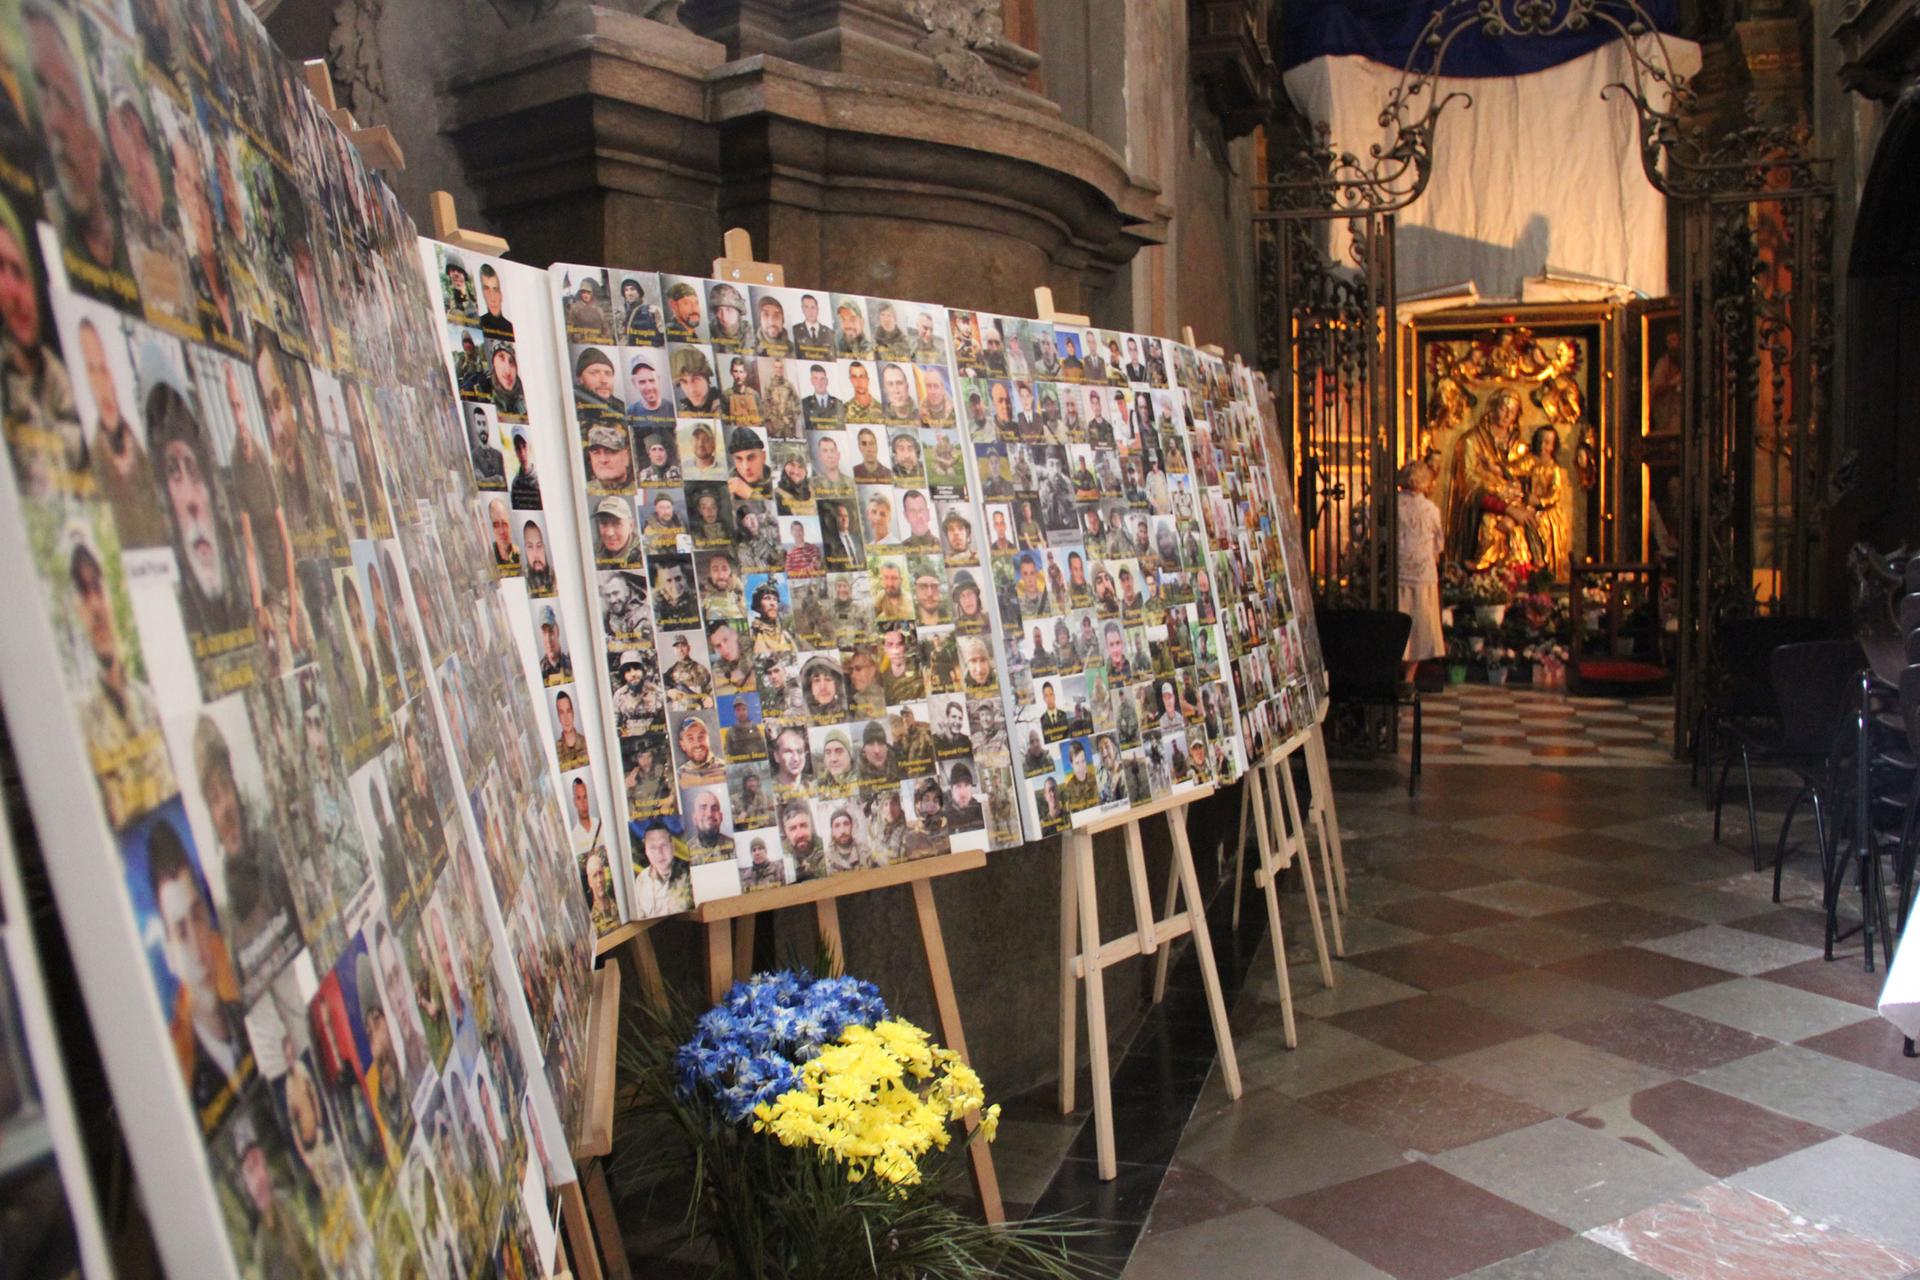 Since 2014, rows and rows of photographs of fallen soldiers have been added to a display within Saints Peter and Paul Garrison Church.